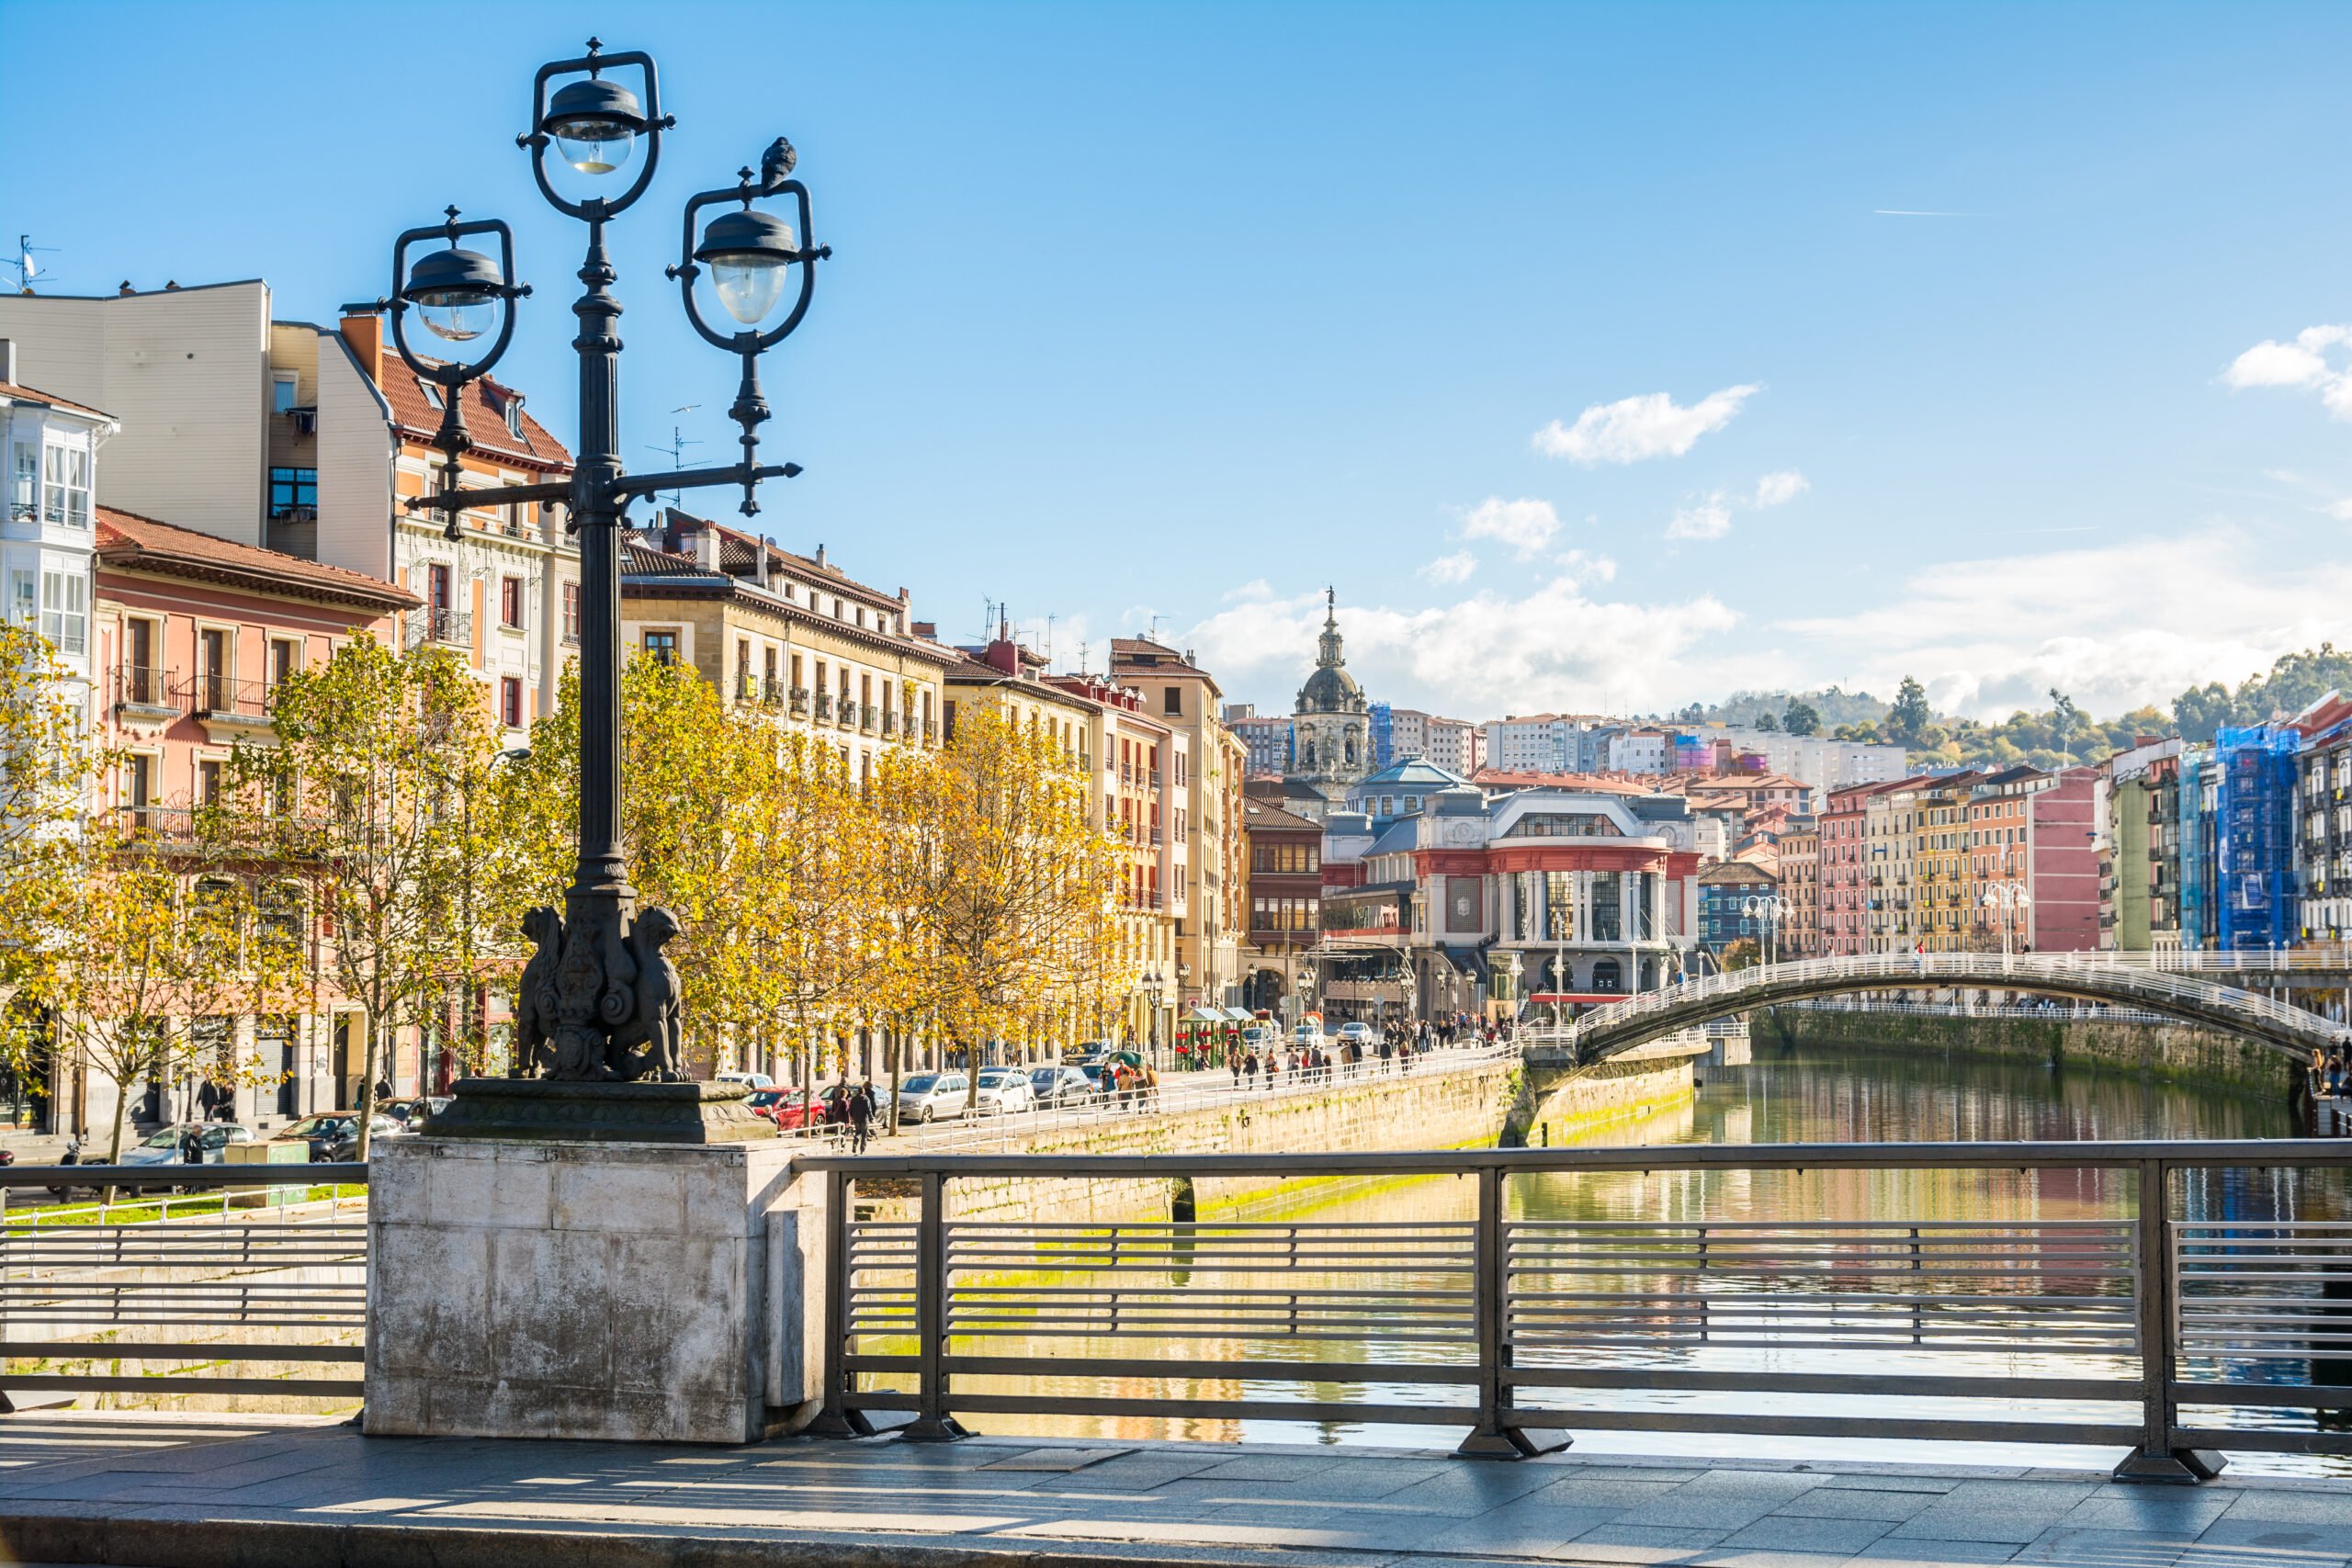 Learn More About Bilbao From Your Local Guide On The Insider Bilbao City Tour